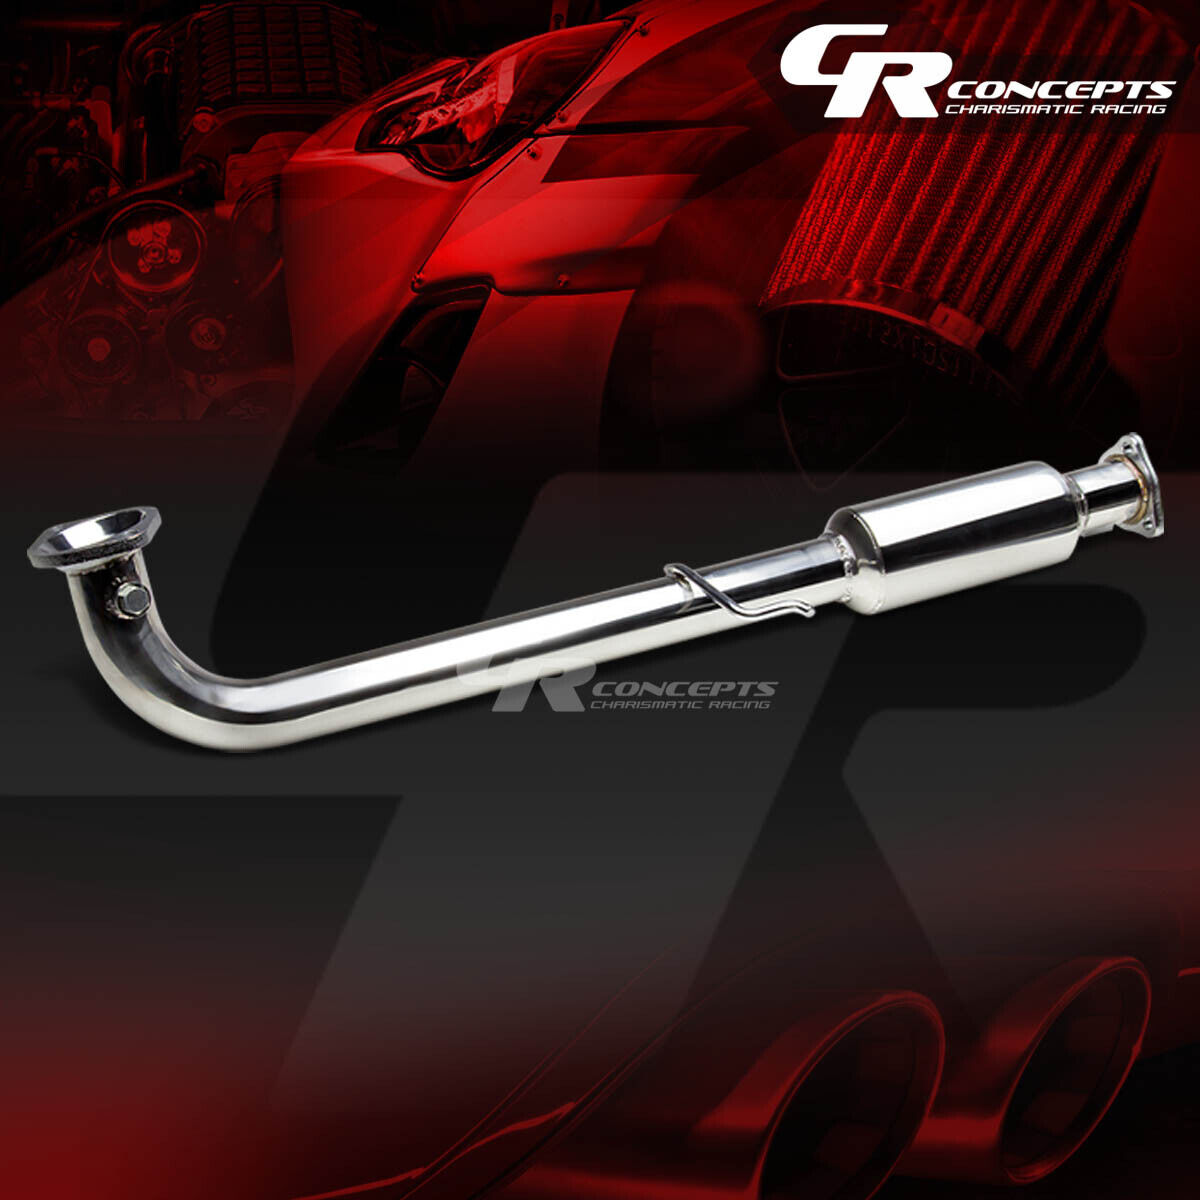 STAINLESS DOWNPIPE EXHAUST HI-FLOW PIPE FOR 01-05 HONDA CIVIC EX EM ES EM2 D17A2